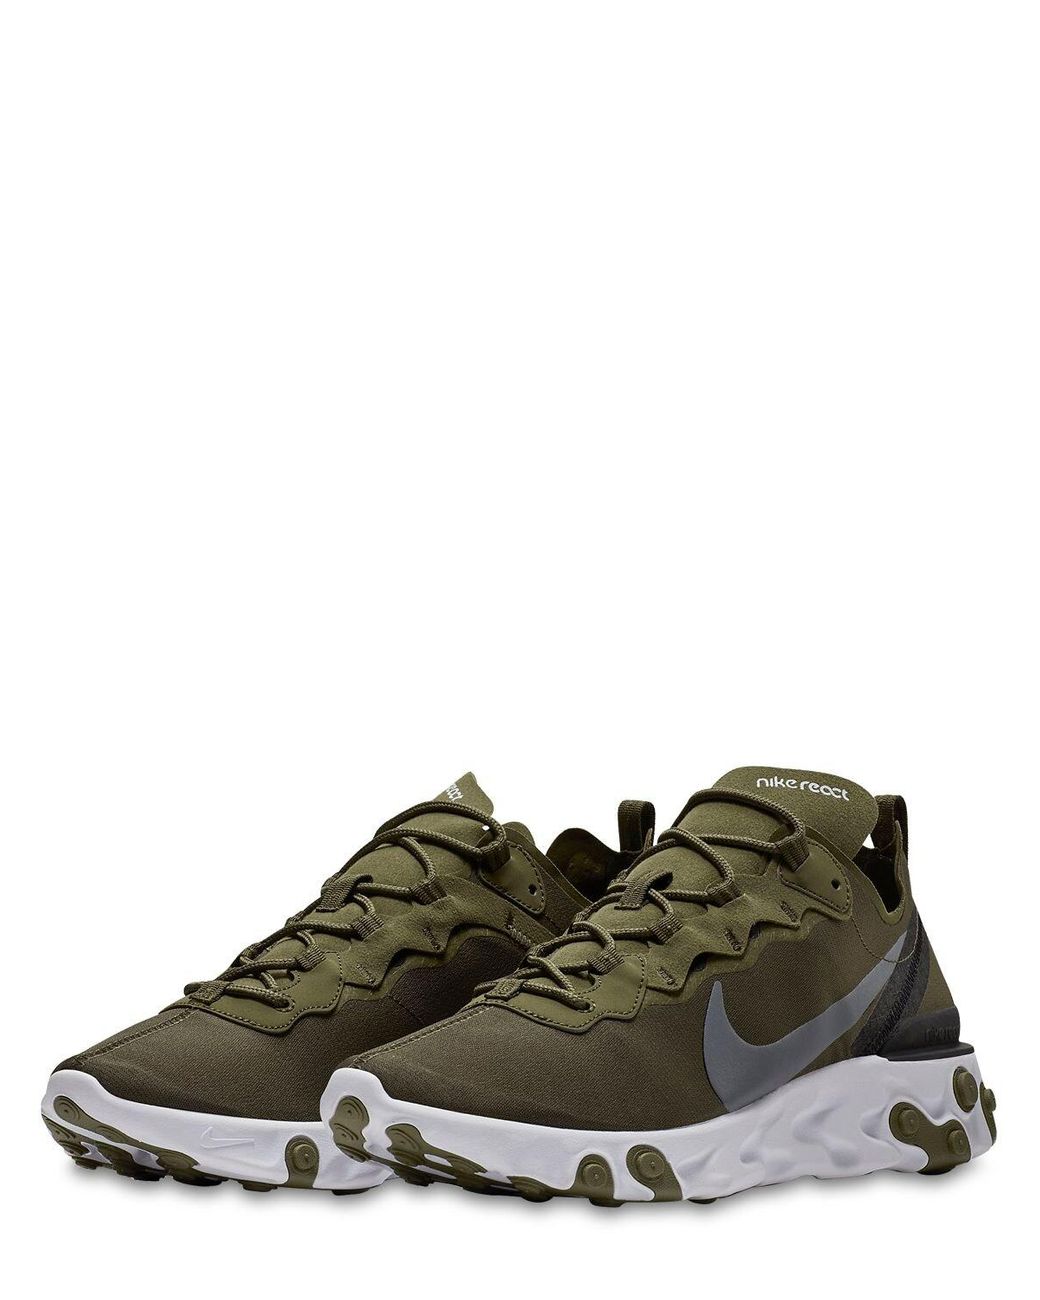 Nike React Element 55 Sneakers in Olive Green (Green) | Lyst